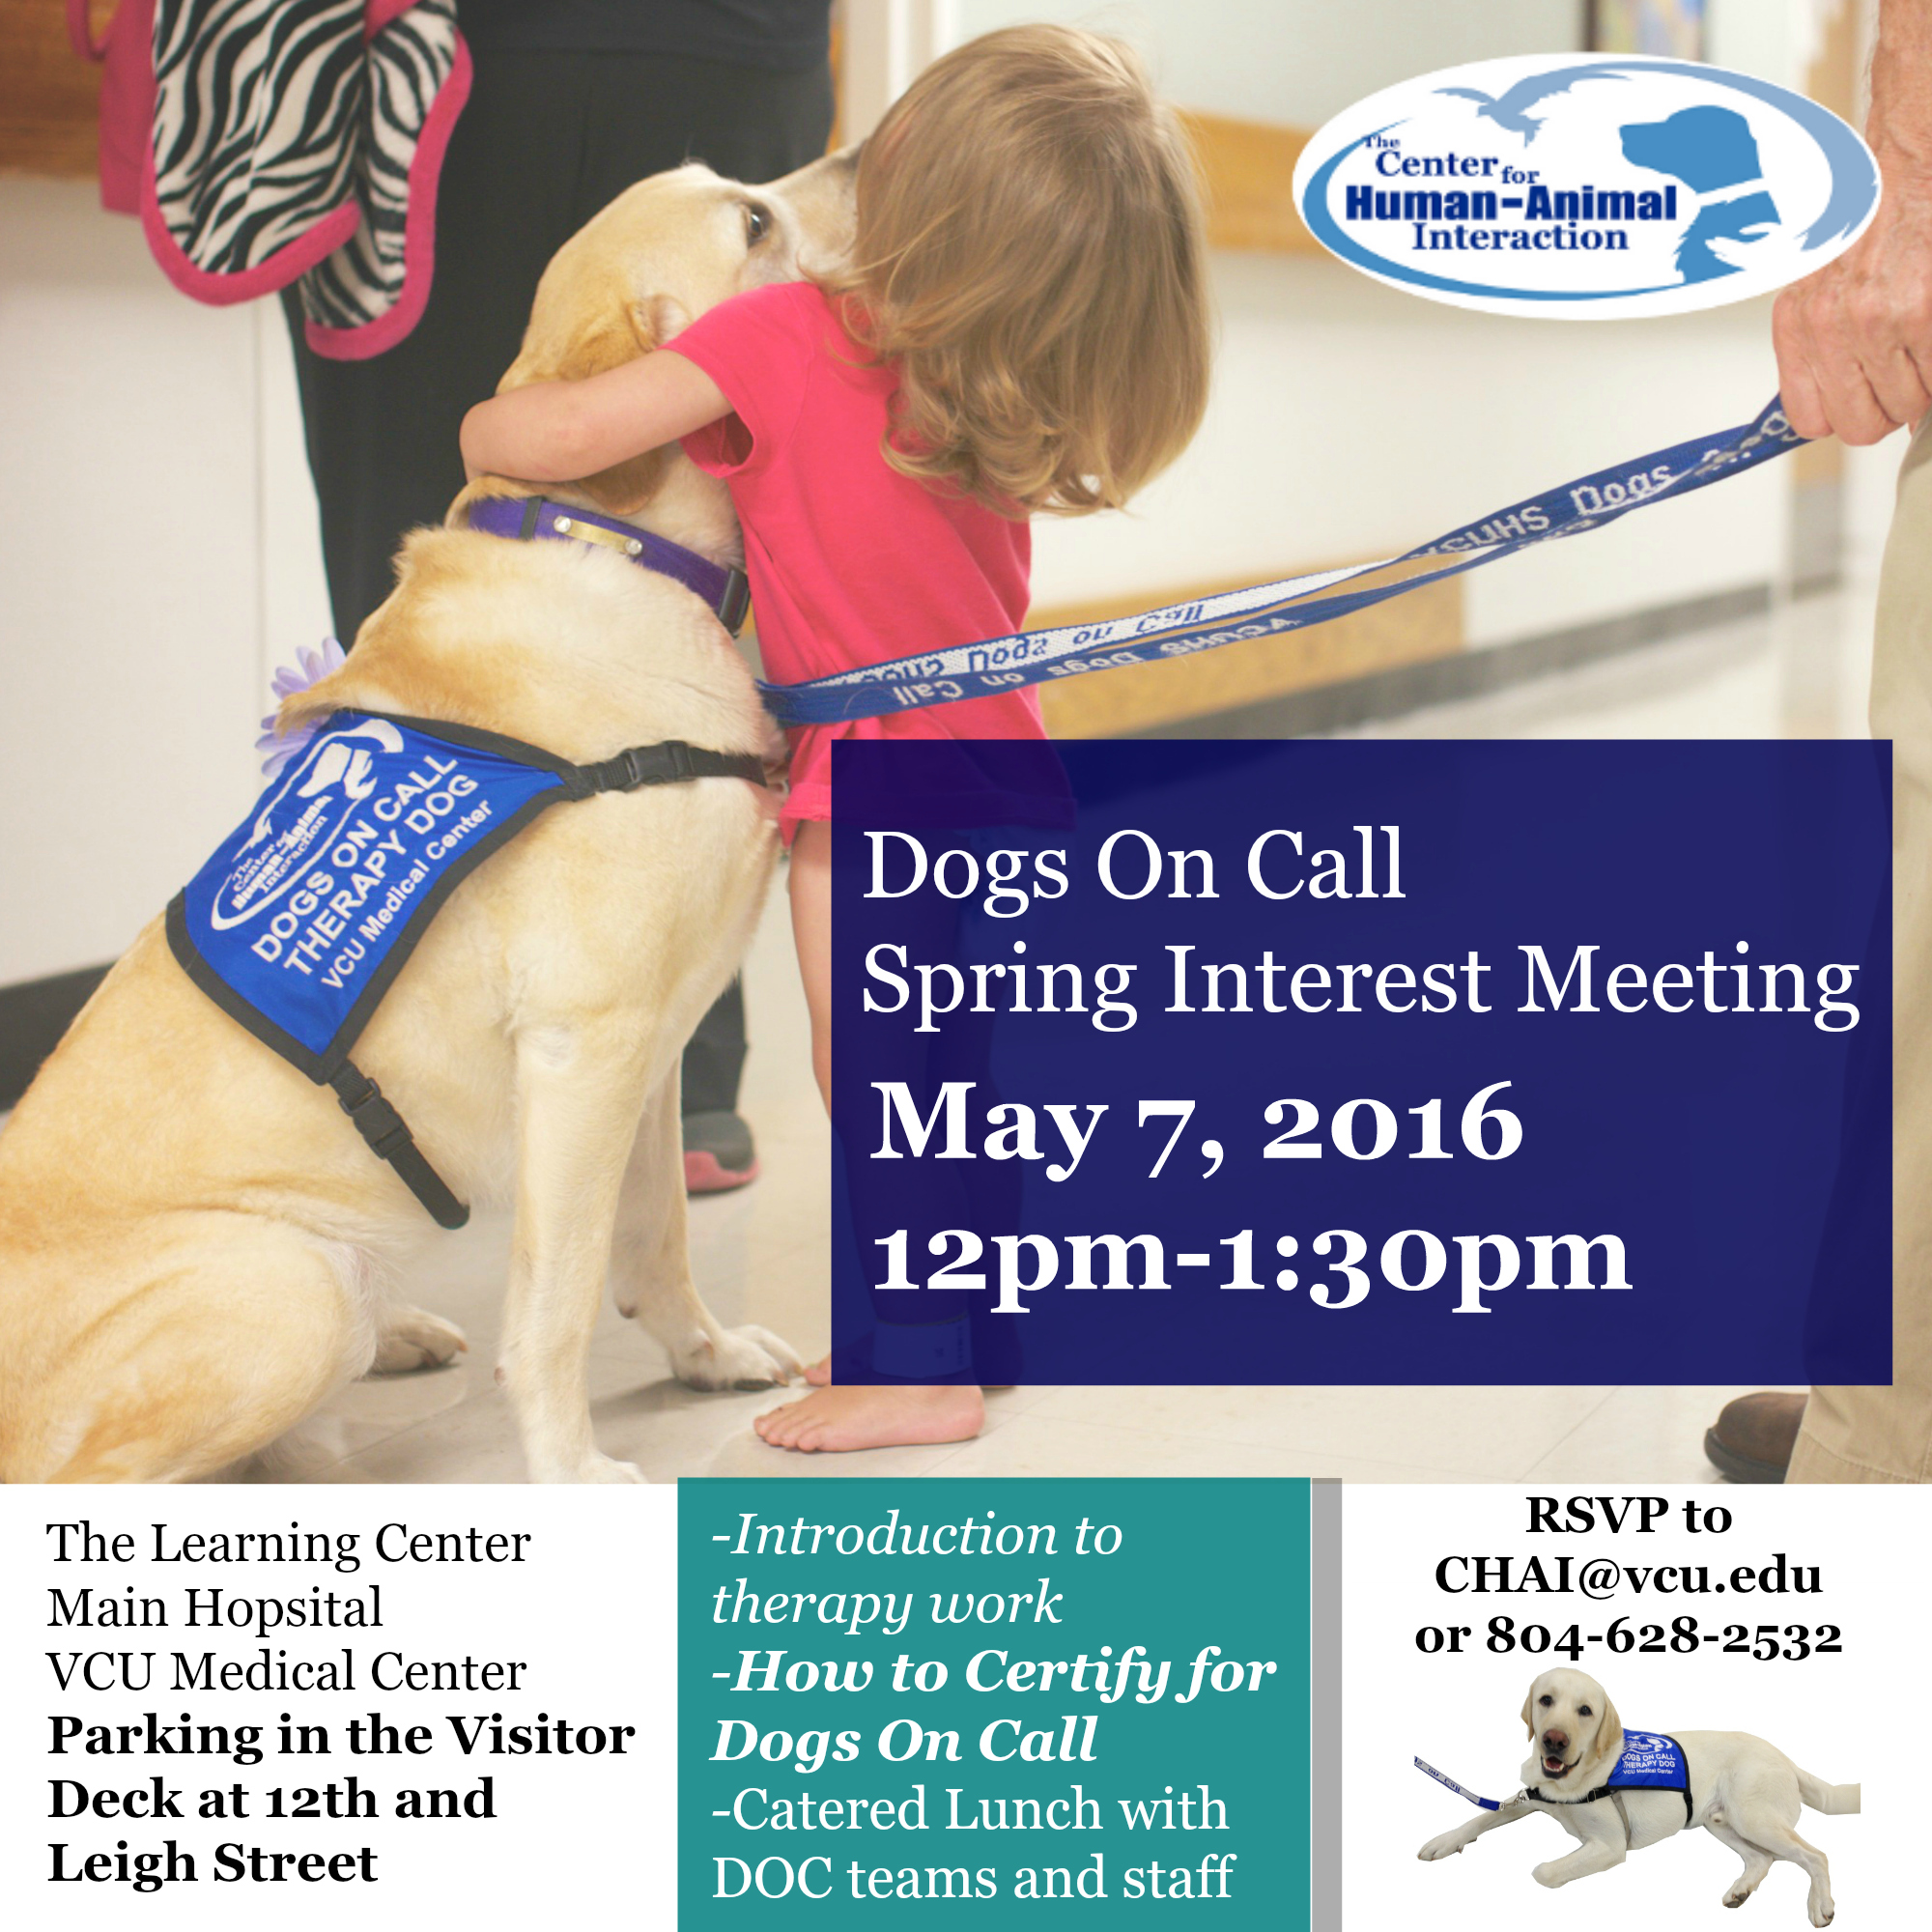 Dogs On Call Spring Interest Meeting